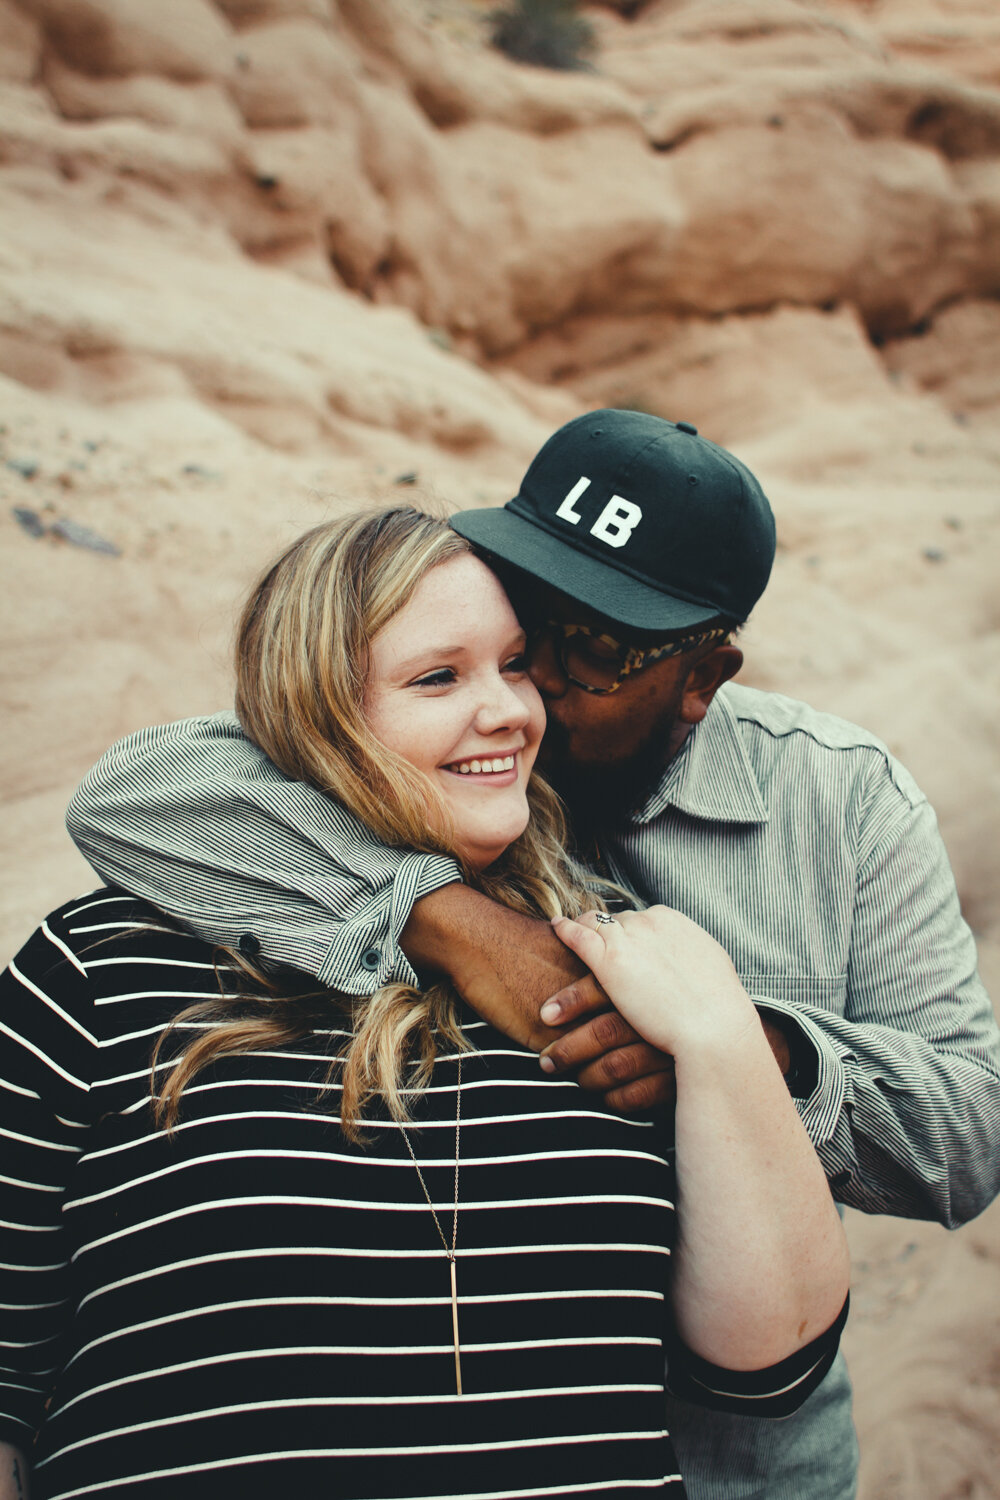 engagement engaged photography photographe marriage wedding photographer corse corsica california desert foothill ranch whiting lifestyle Anza Creative-13.jpg